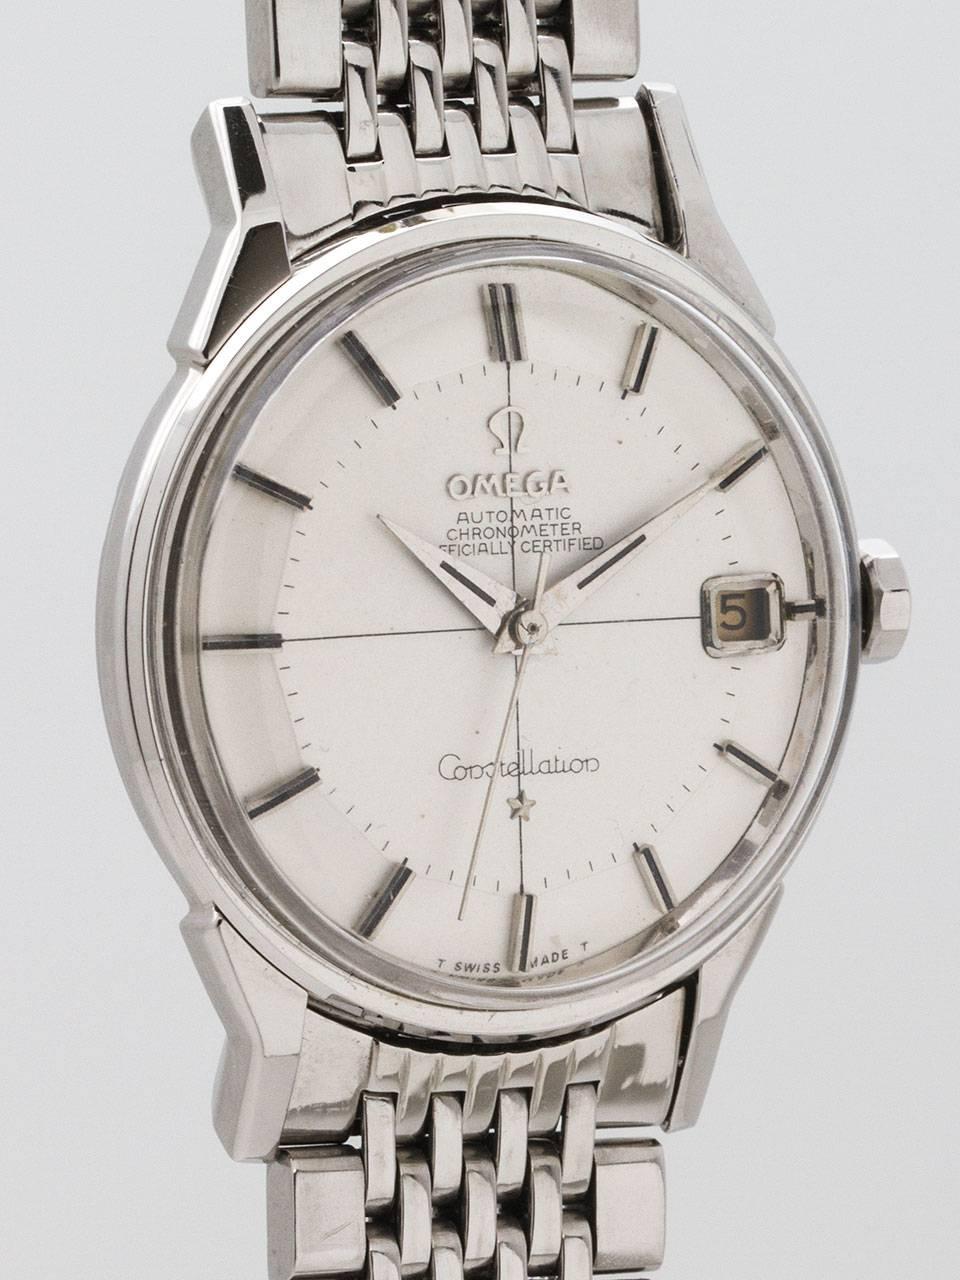 Omega Stainless Steel Constellation ref 14900 movement serial #19 million circa 1962. Beautiful condition example with sharp condition case measuring 34 x 43mm. Minty condition original 2 tone silvered satin pie pan dial with applied silver indexes